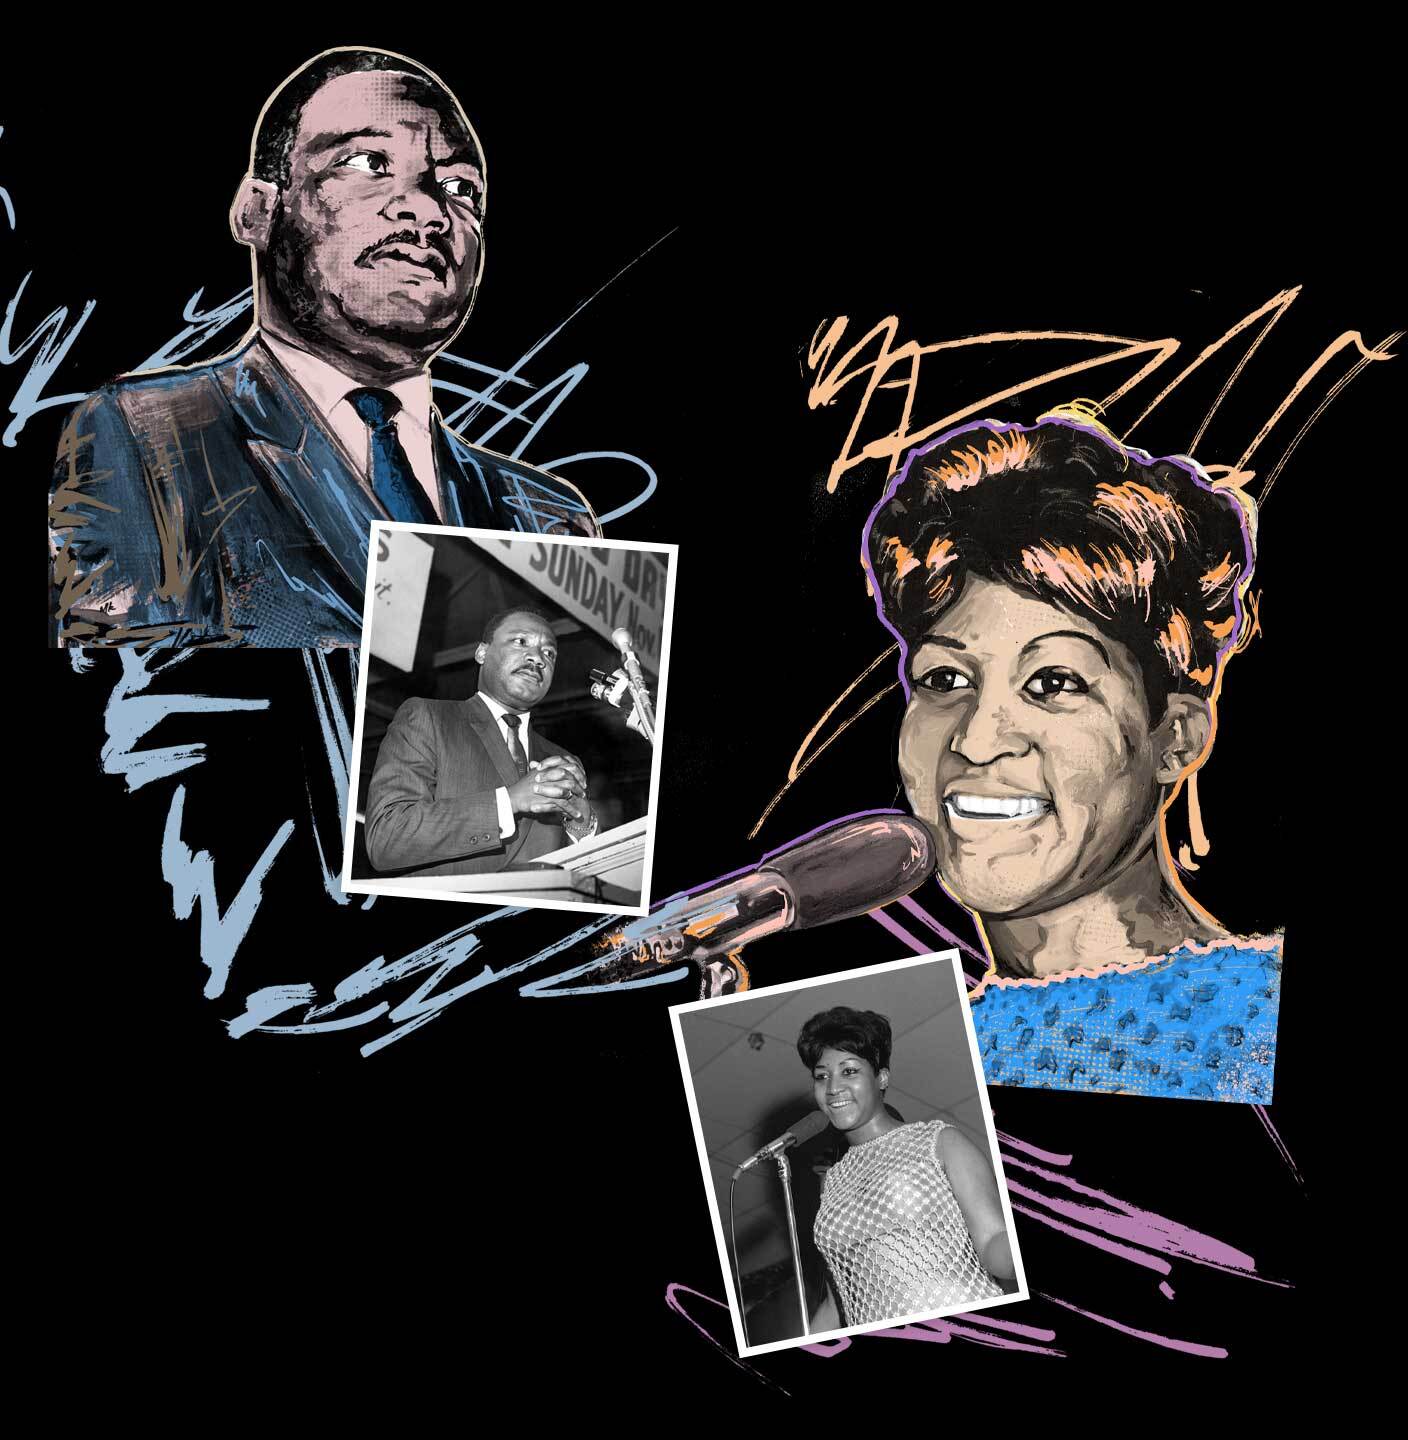 Side-by-side artistic illustrations of MLK and Aretha Franklin, with matching black-and-white photographs next to them.